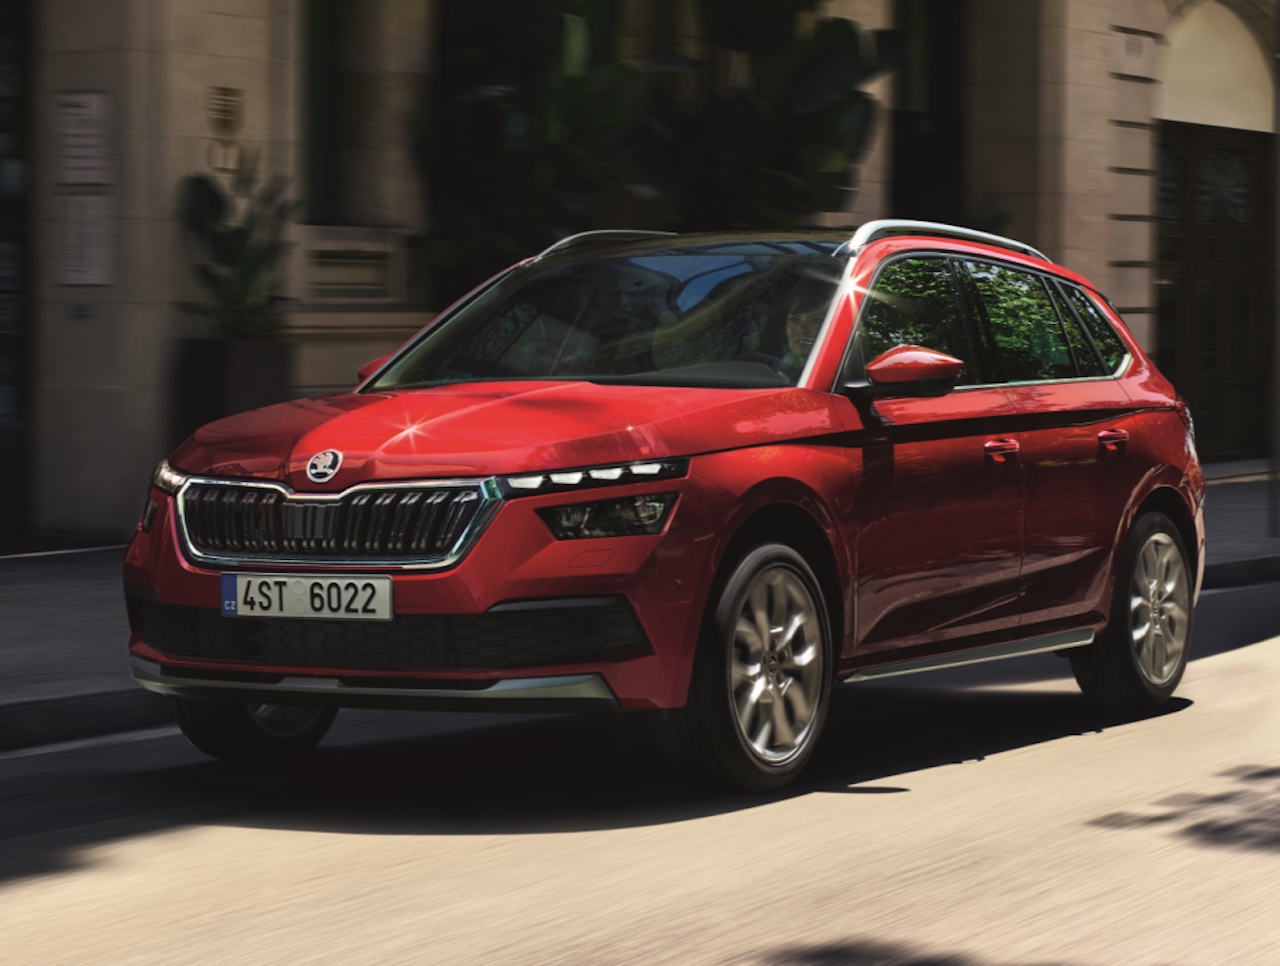 Skoda price list 2023: All models and offers